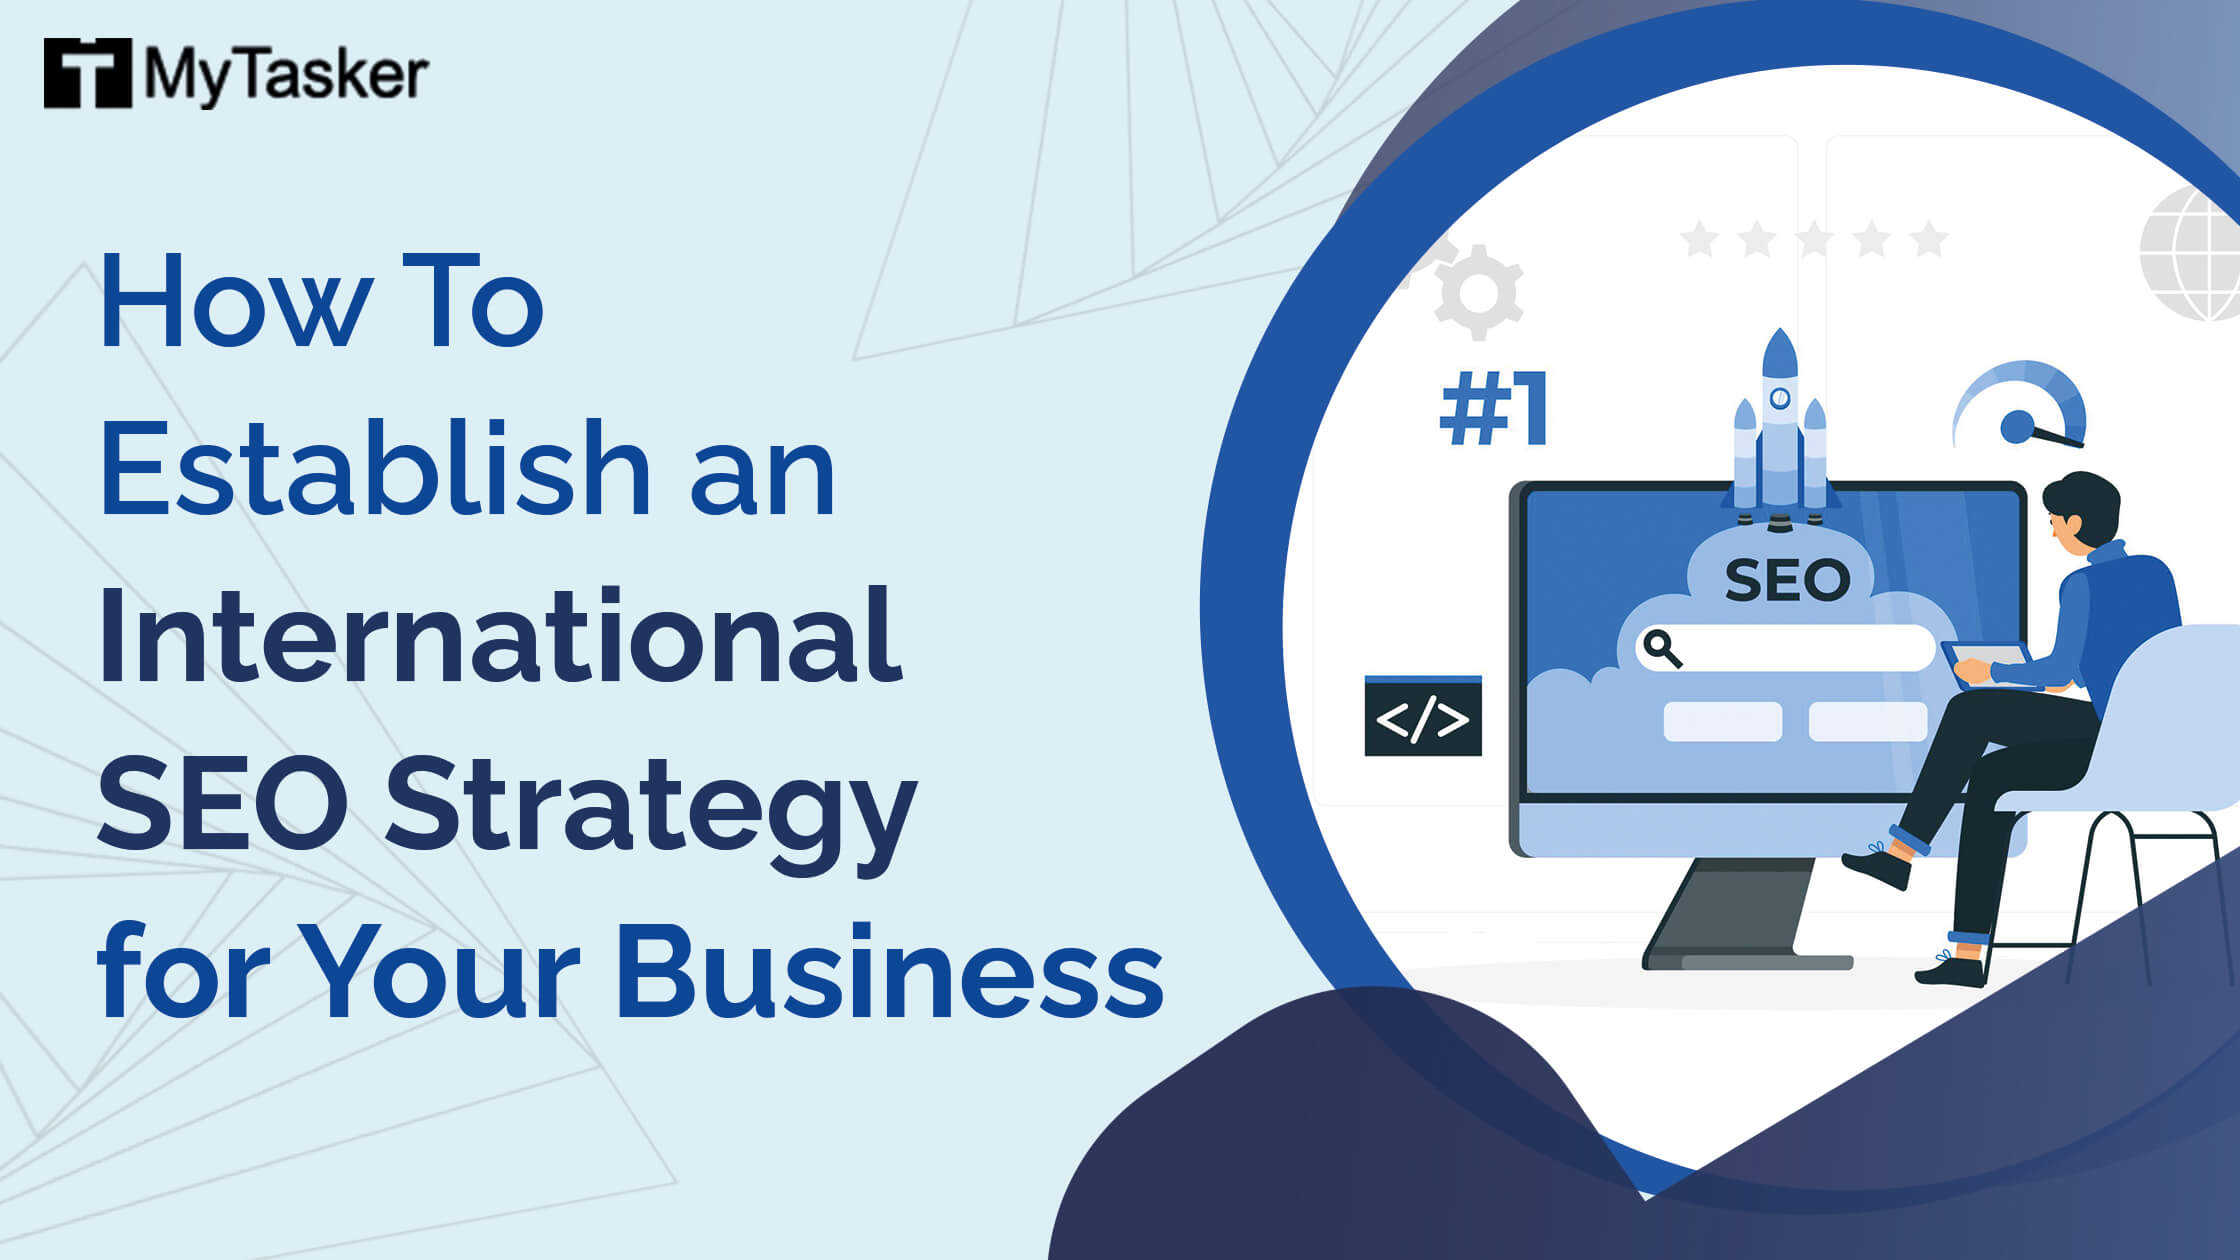 How To Establish an International SEO Strategy for Your Business